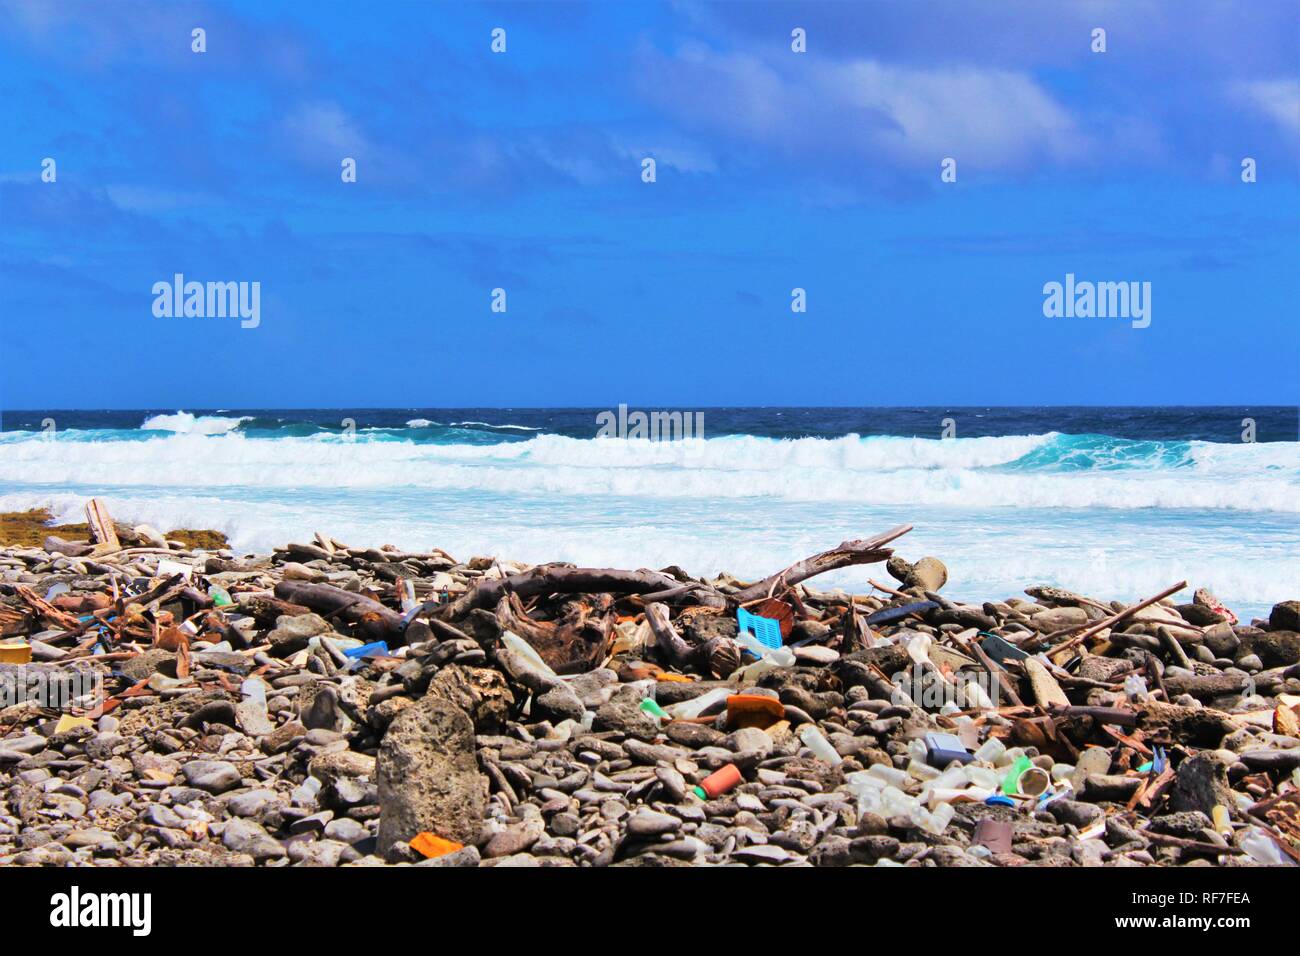 Rubbish washed ashore on the island of Bonaire, from the polluted Caribbean ocean. Plastic pollution in the oceans is a growing worldwide problem. Stock Photo